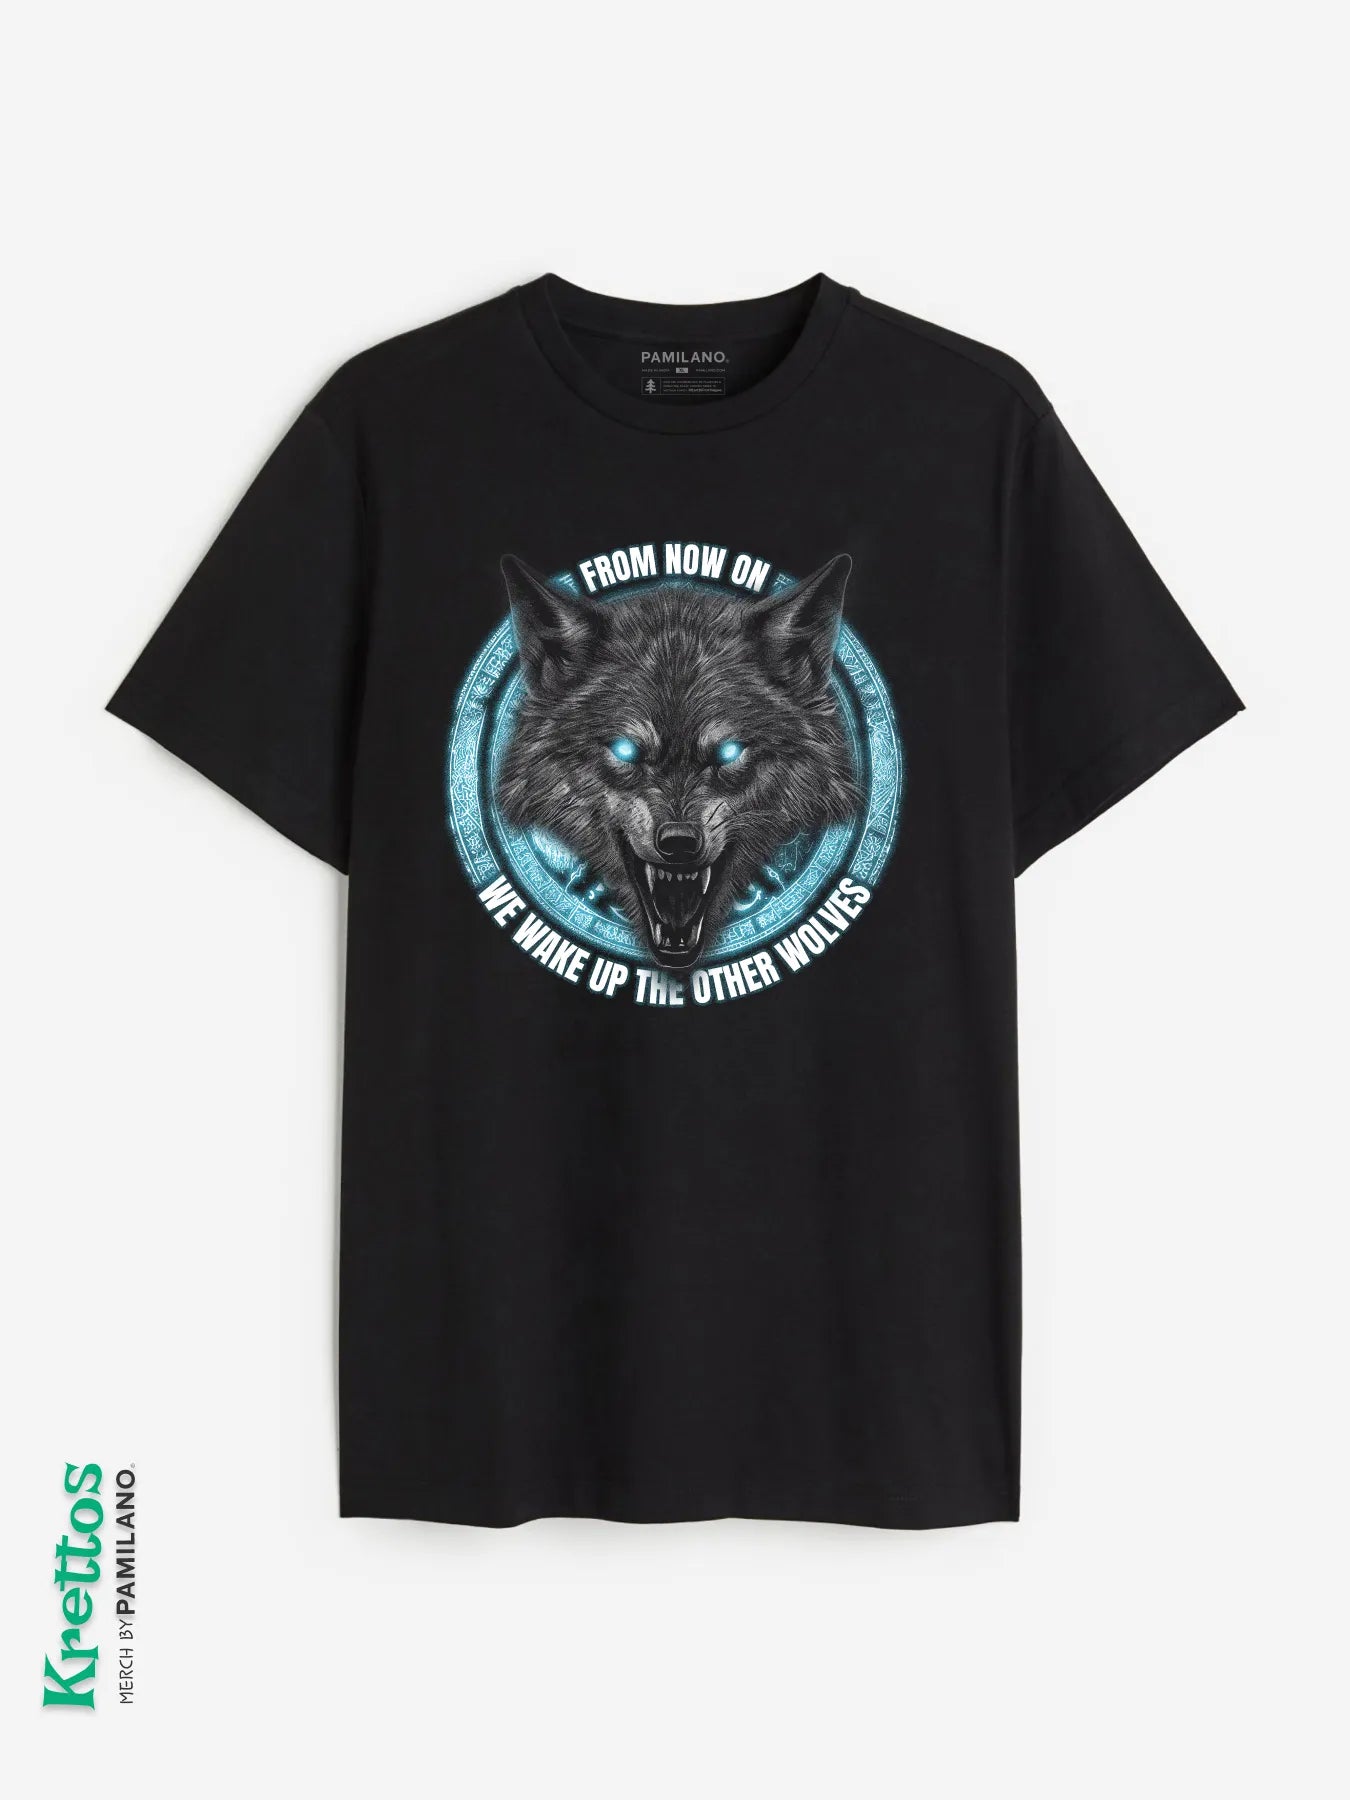 A Realistic Wolf with Glowing Eyes and The Quote